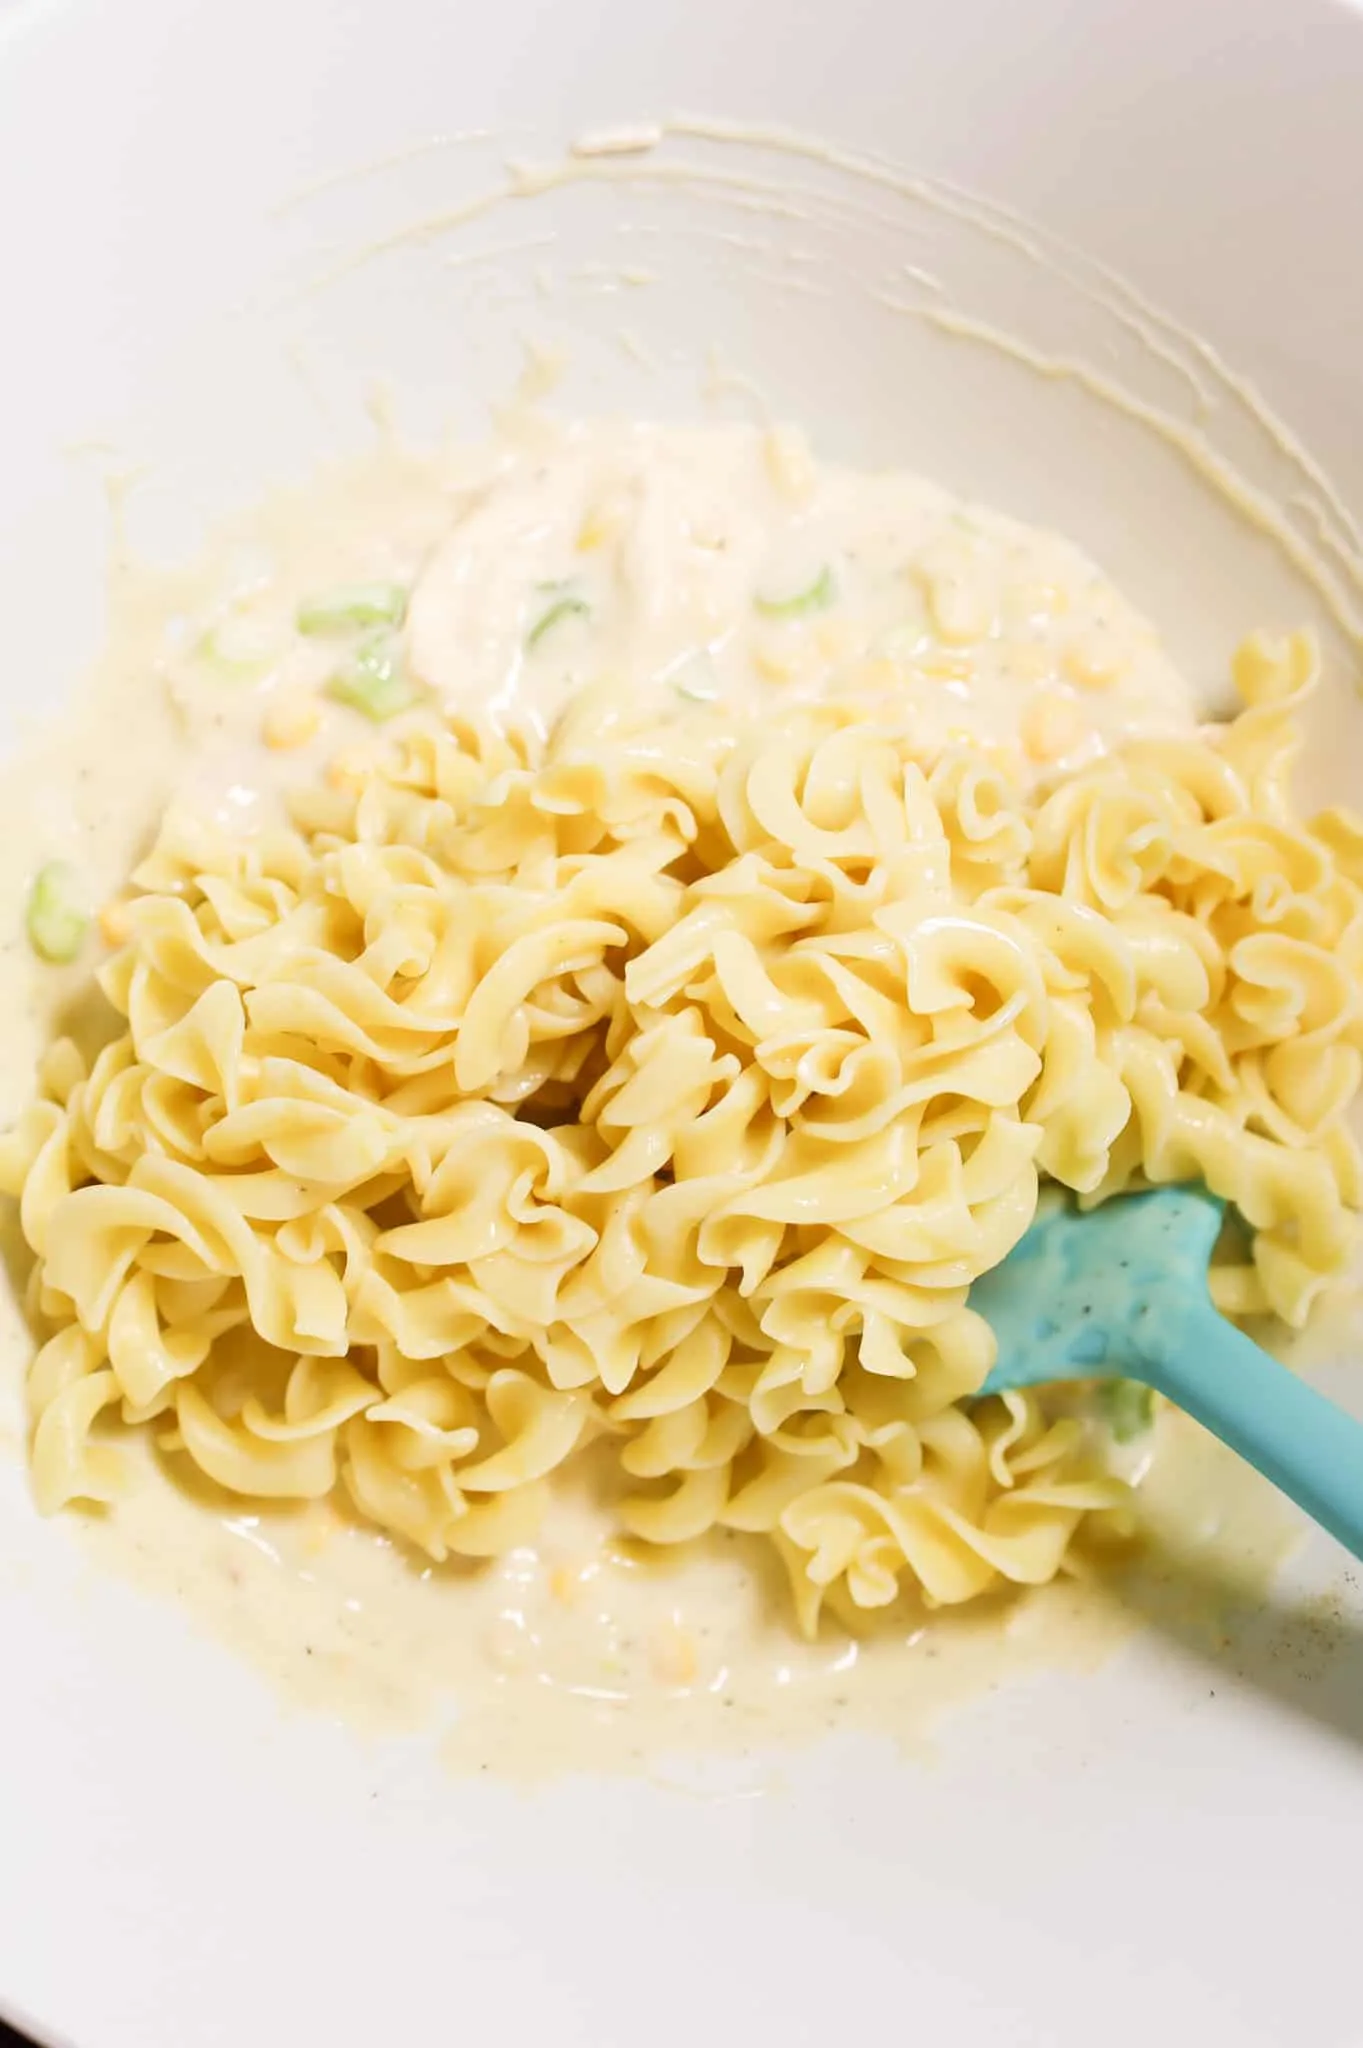 cooked egg noodles on top of creamy soup mixture in a mixing bowl